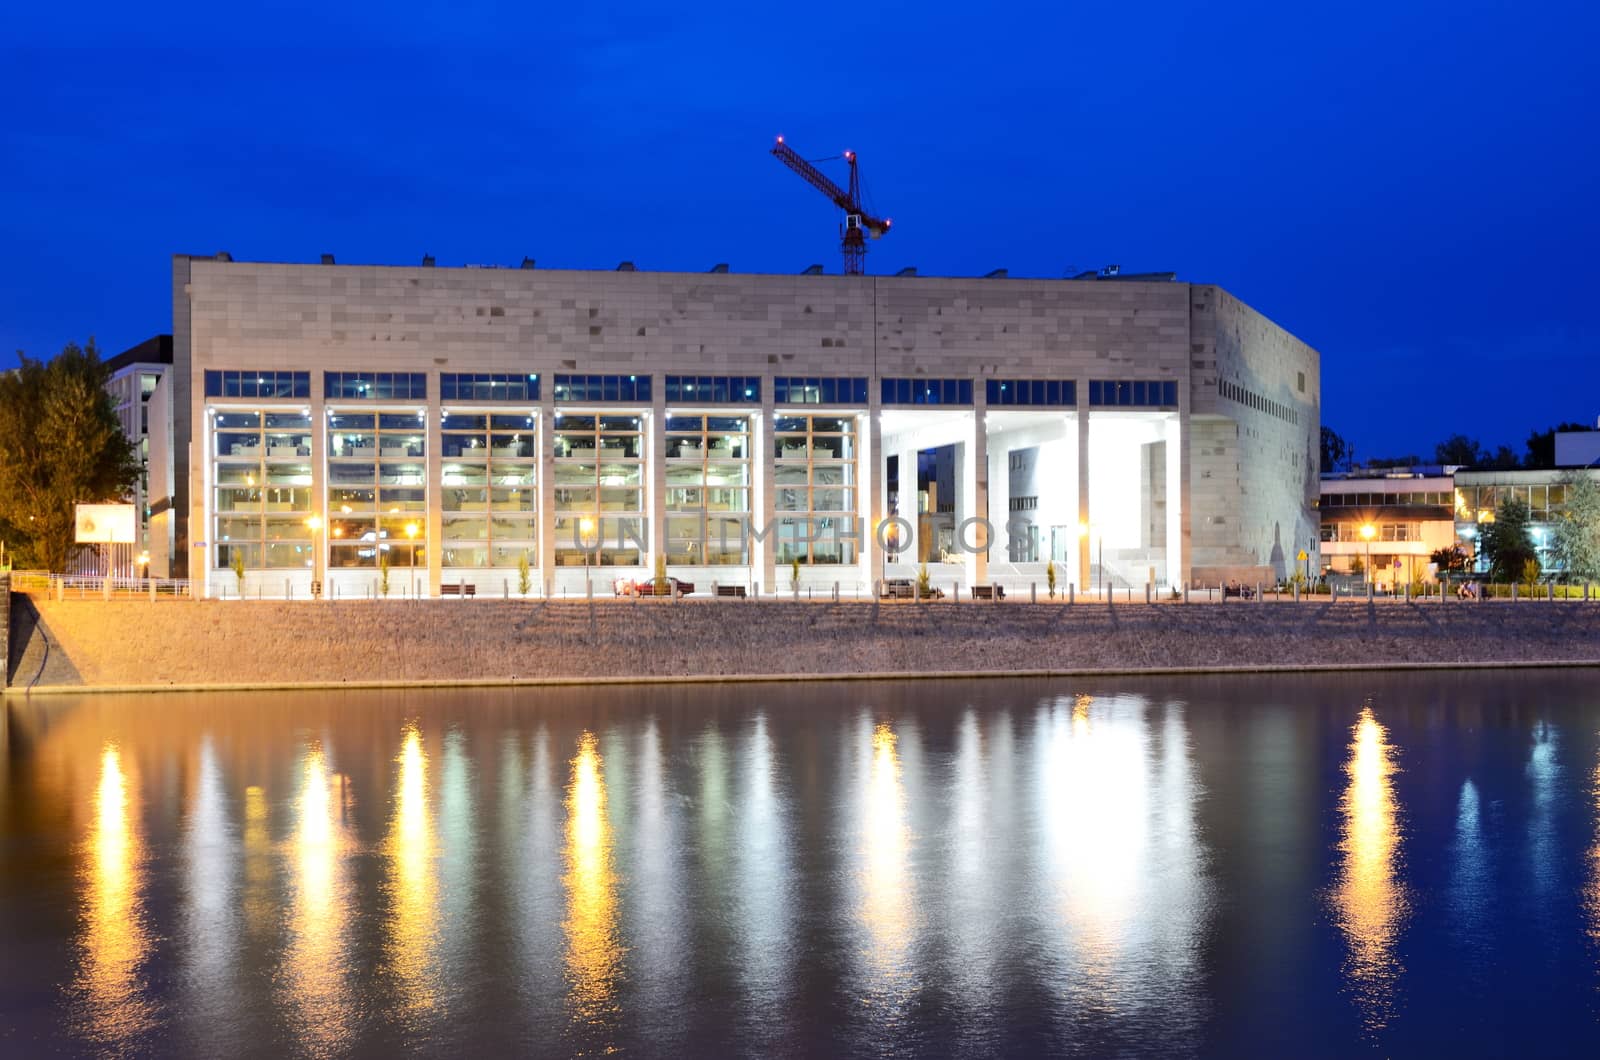 WROCLAW, POLAND - MAY 30: Wroclaw's University Library at Odra river bank by night. In 2016 Wroclaw is European Capitol of Culture. 